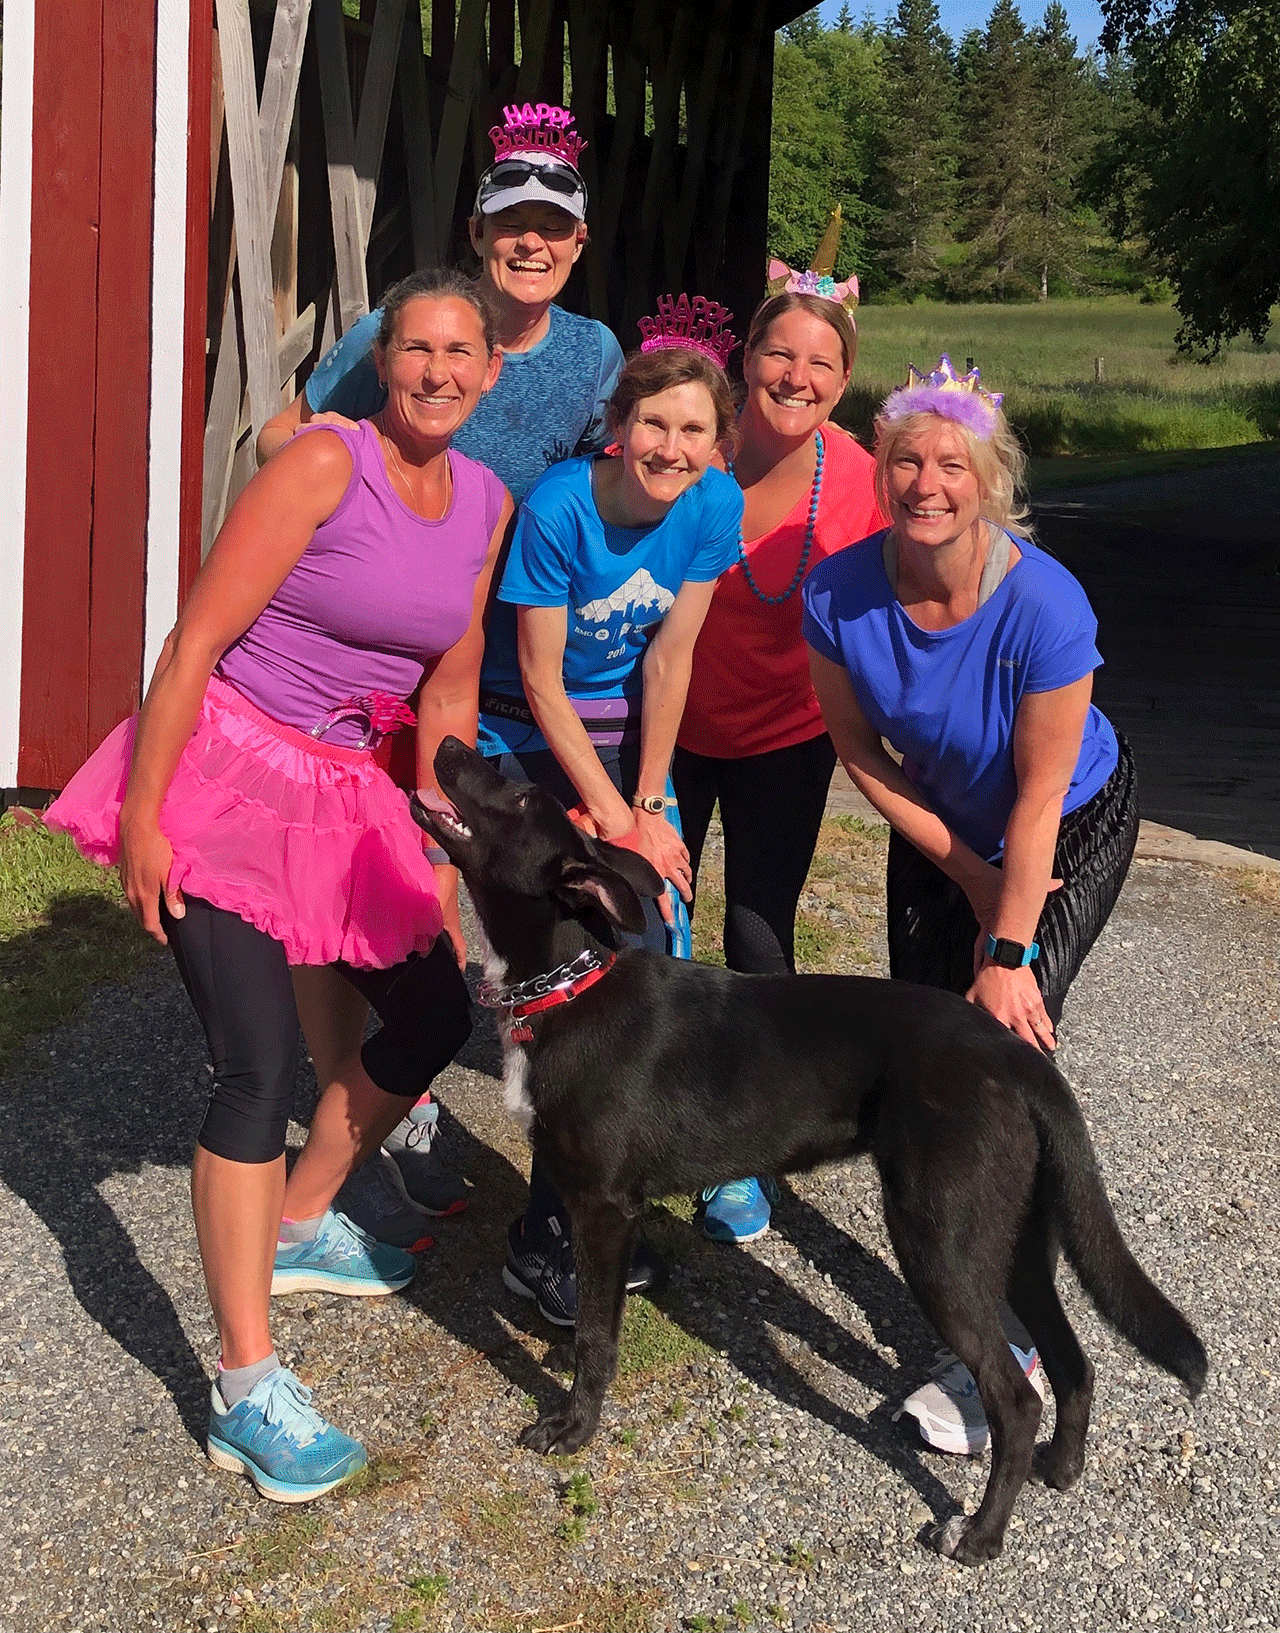 (Photo Courtesy of Ginger Hamilton)
Group photo of Hamilton and her running group on a birthday celebration run in June 2021. Hamilton credits her group in keeping her motivated to keep running over the years. From left to right: Ginger Hamilton, Susan Swan, Katie Simpson, Jenny Wegley and Tavi Black.